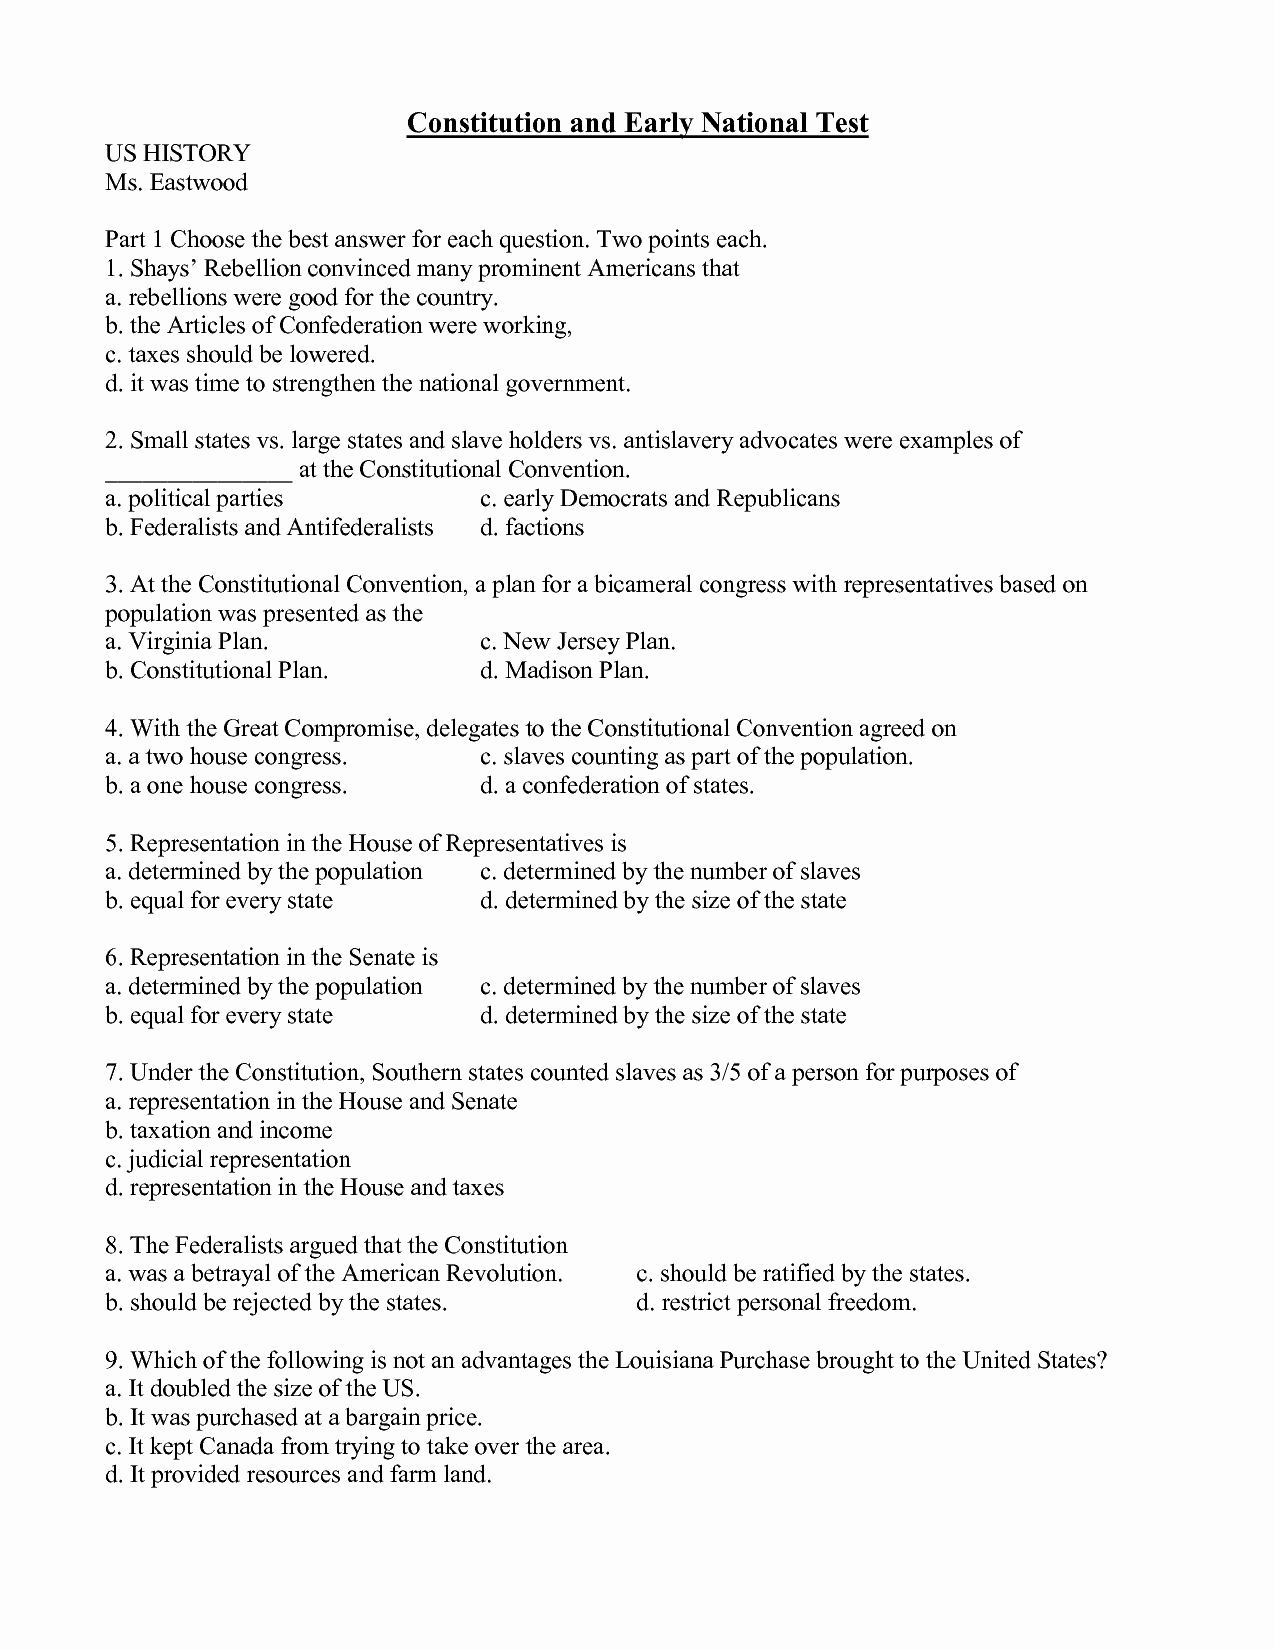 Articles Of Confederation Worksheet Best Of Articles Of Confederation themes Things Pertaining to